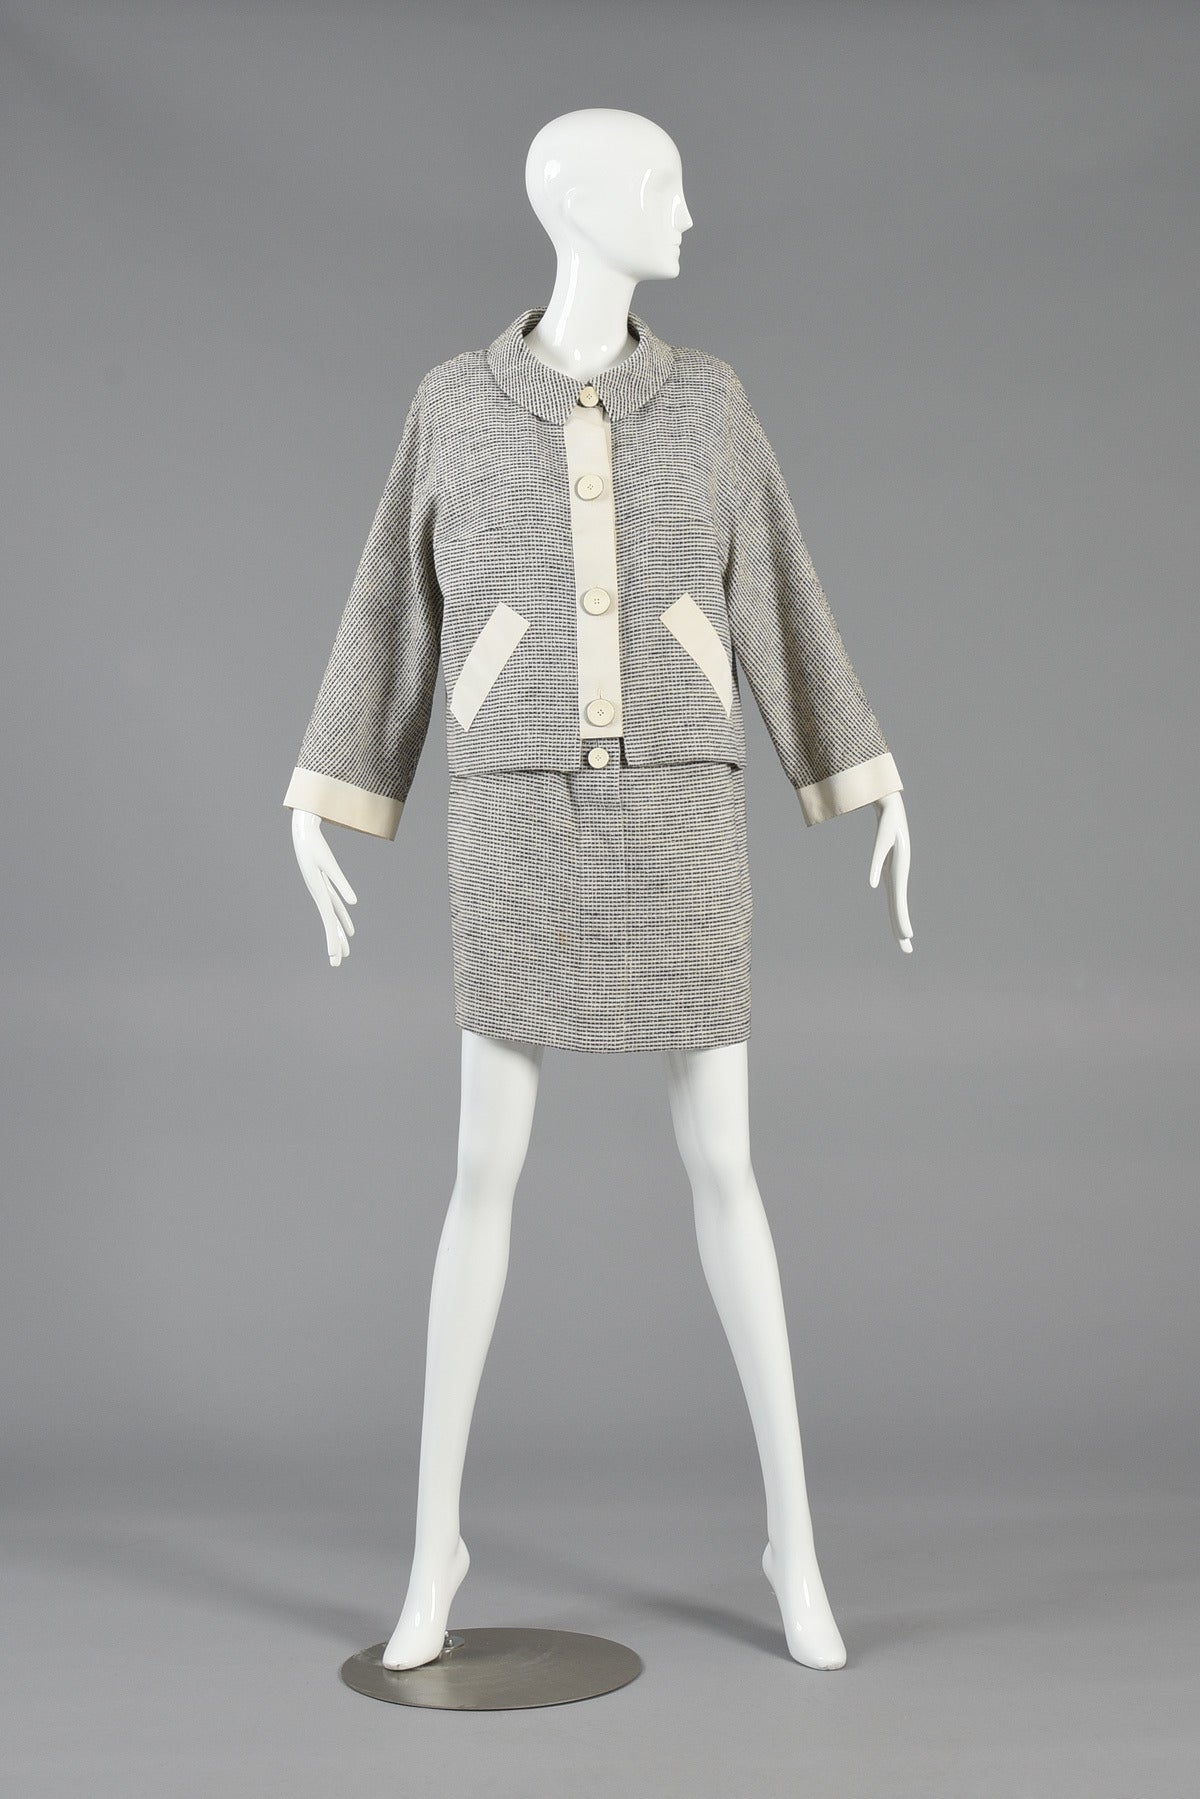 Super cute 1990s 2-piece dress and jacket set by Karl Lagerfeld. Such a great find!

Adorable button front sack dress with metal trimmed ivory buttons. 

The jacket features kimono-esque sleeves with grosgrain details and matching metal trimmed